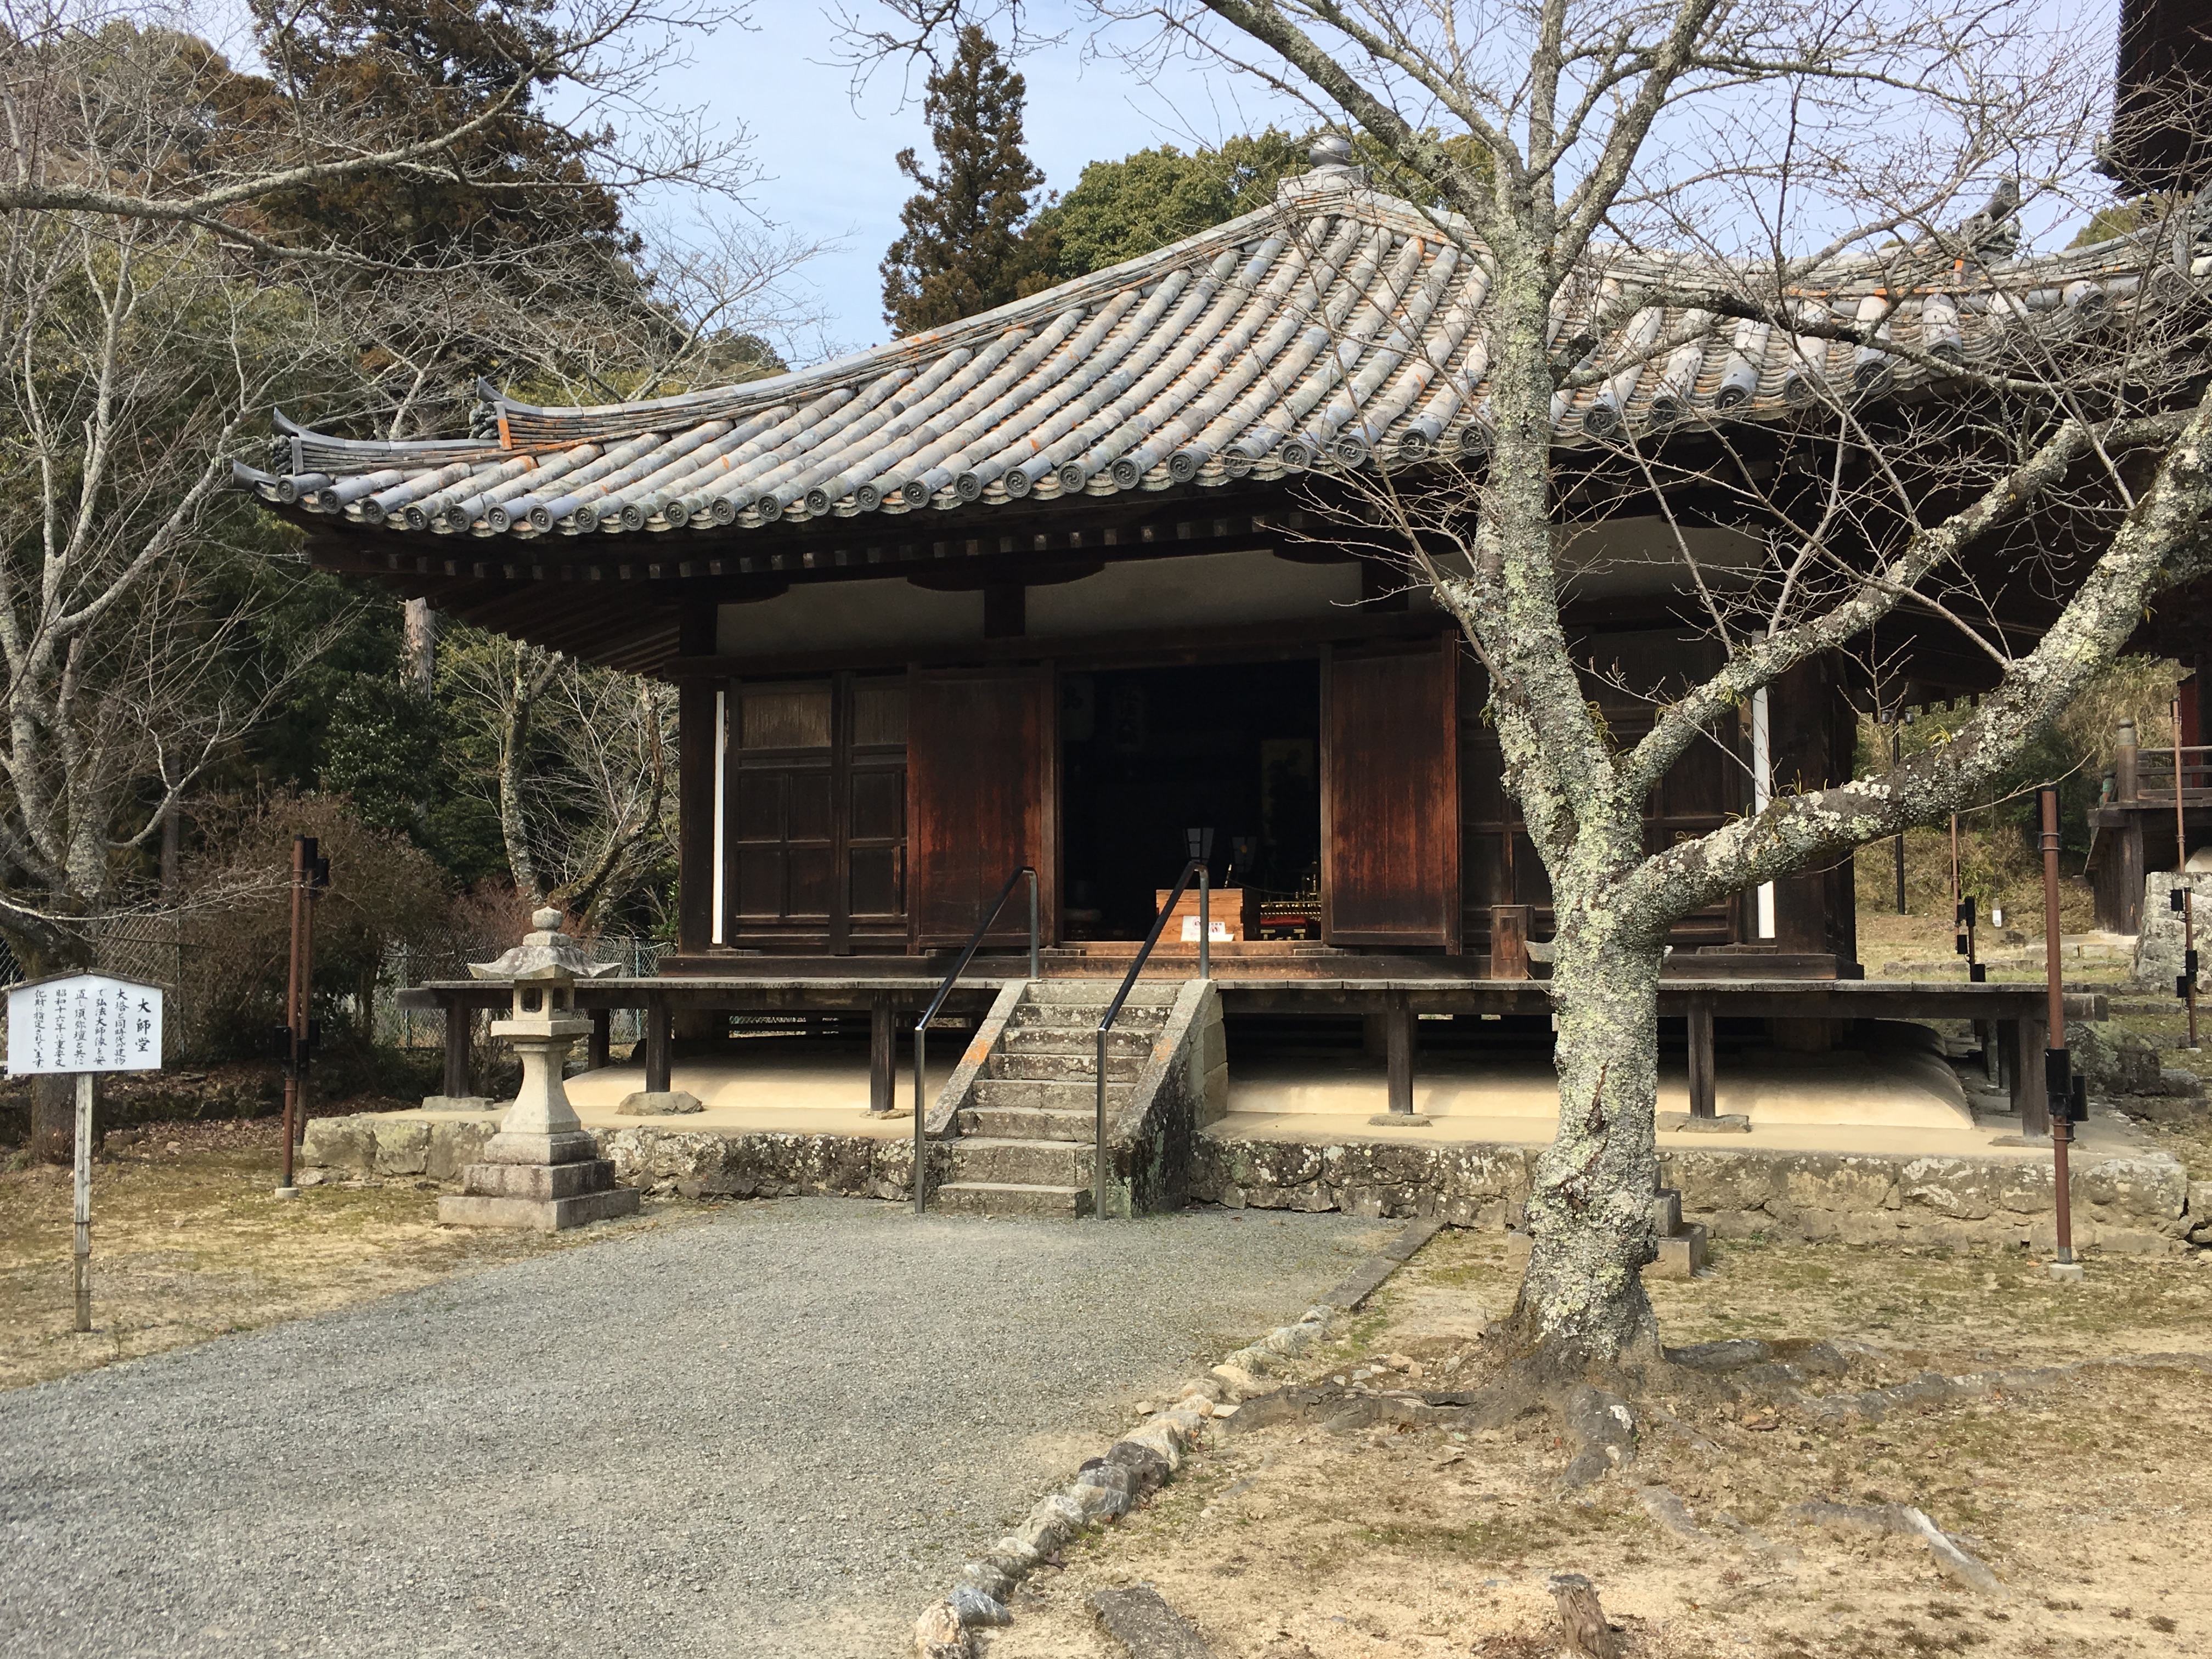 small wooden Japanese temple building from the 1300s in Negoro-ji